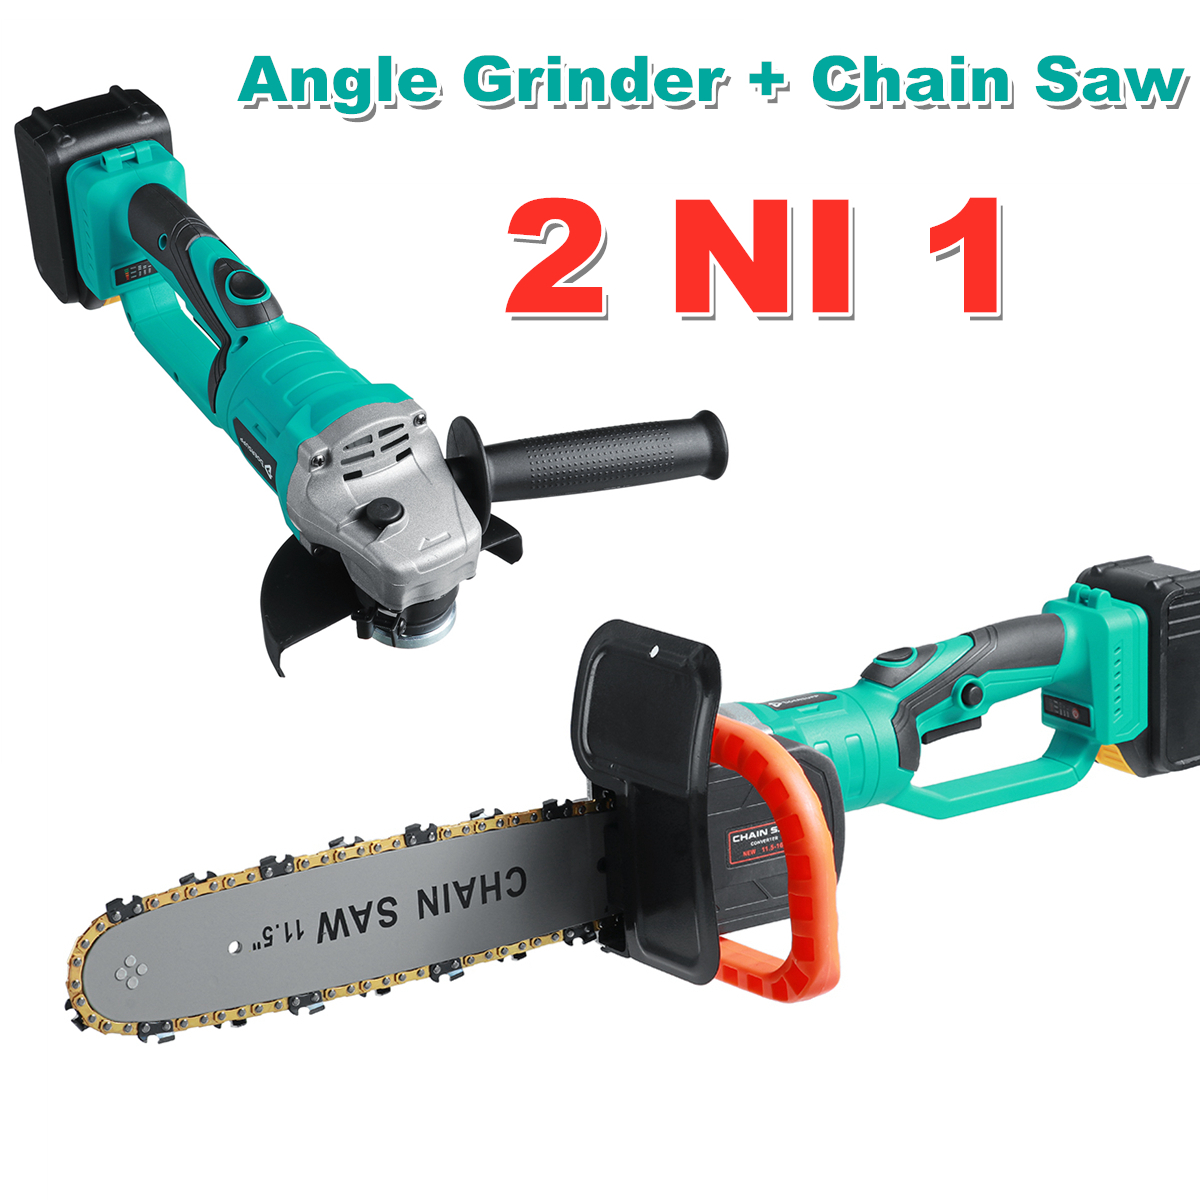 100125mm-Electric-Angle-Grinder-Chainsaw-Woodworking-Cutting-Chainsaw-Bracket-W-12pcs-Battery-1829242-1